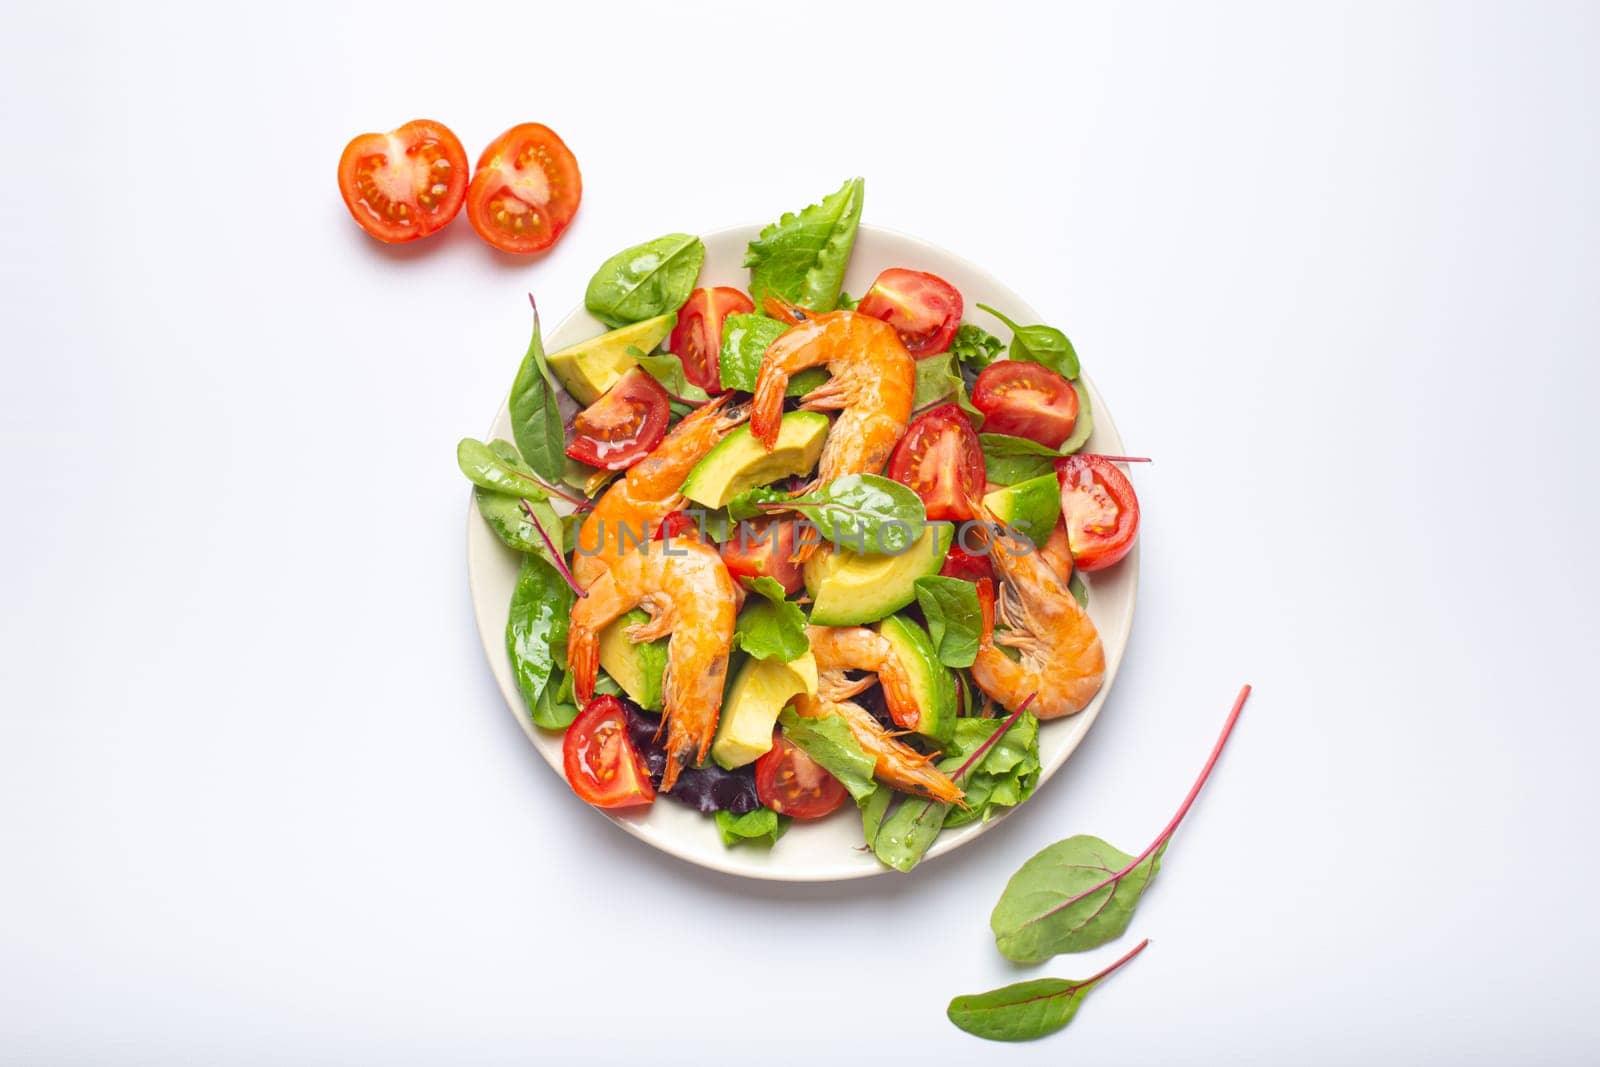 Healthy salad with grilled shrimps, avocado, cherry tomatoes and green leaves on white plate isolated on white background top view. Clean eating, nutrition and dieting concept by its_al_dente